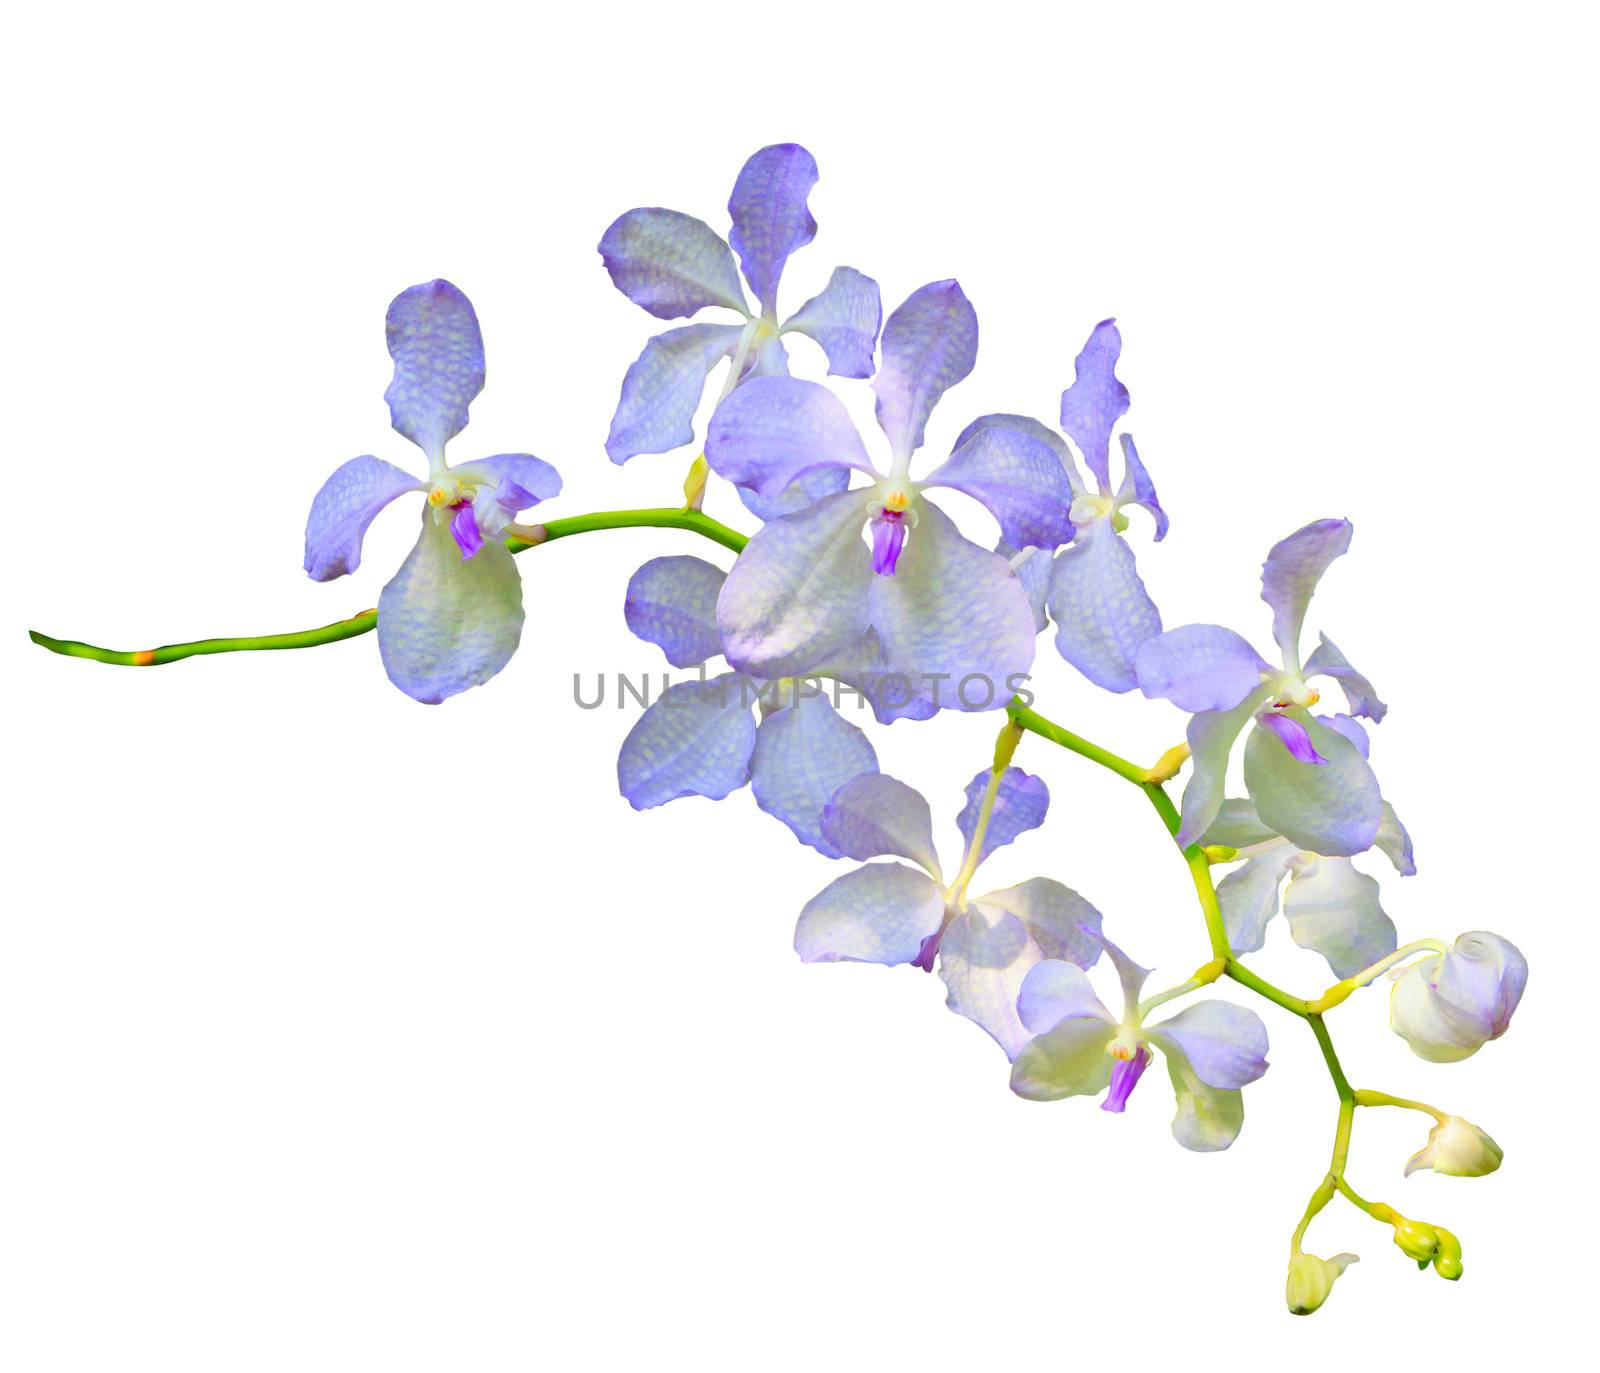  purple vanda coerulea orchid flower isolated on white background use for decoration and multipurpose